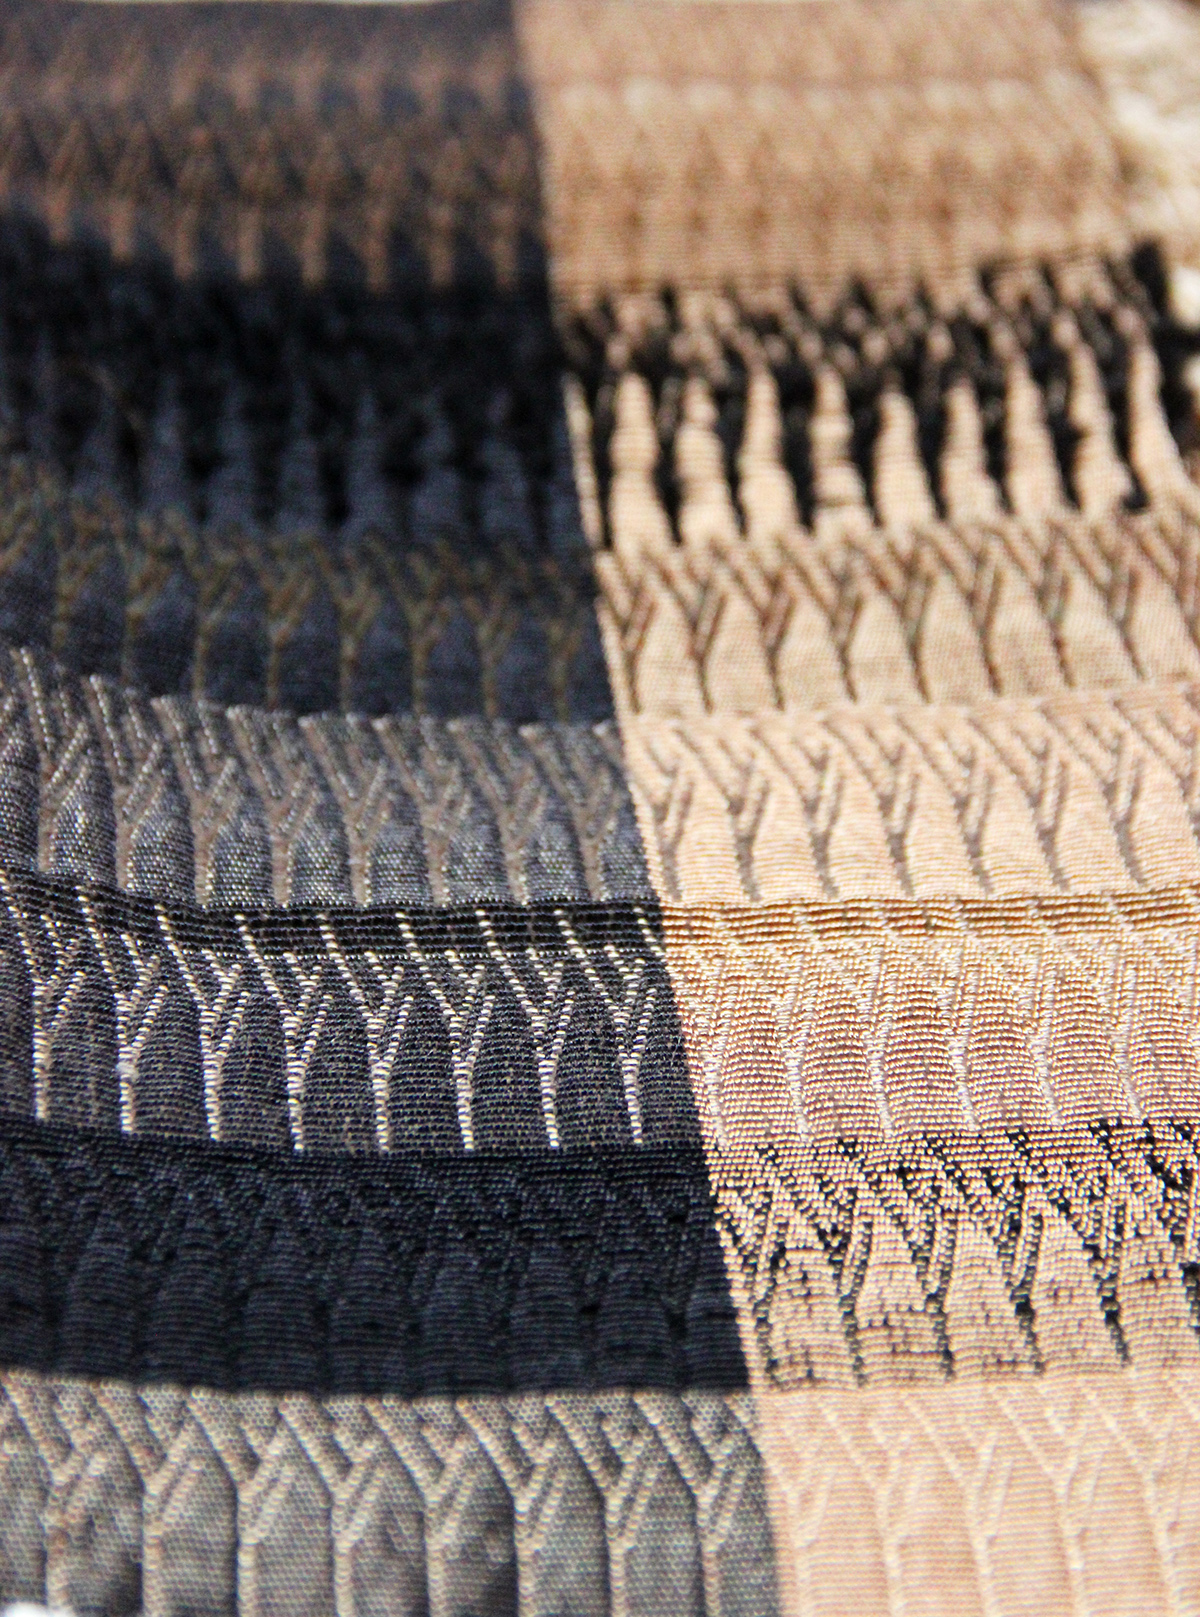 weaving knitting france surface texture